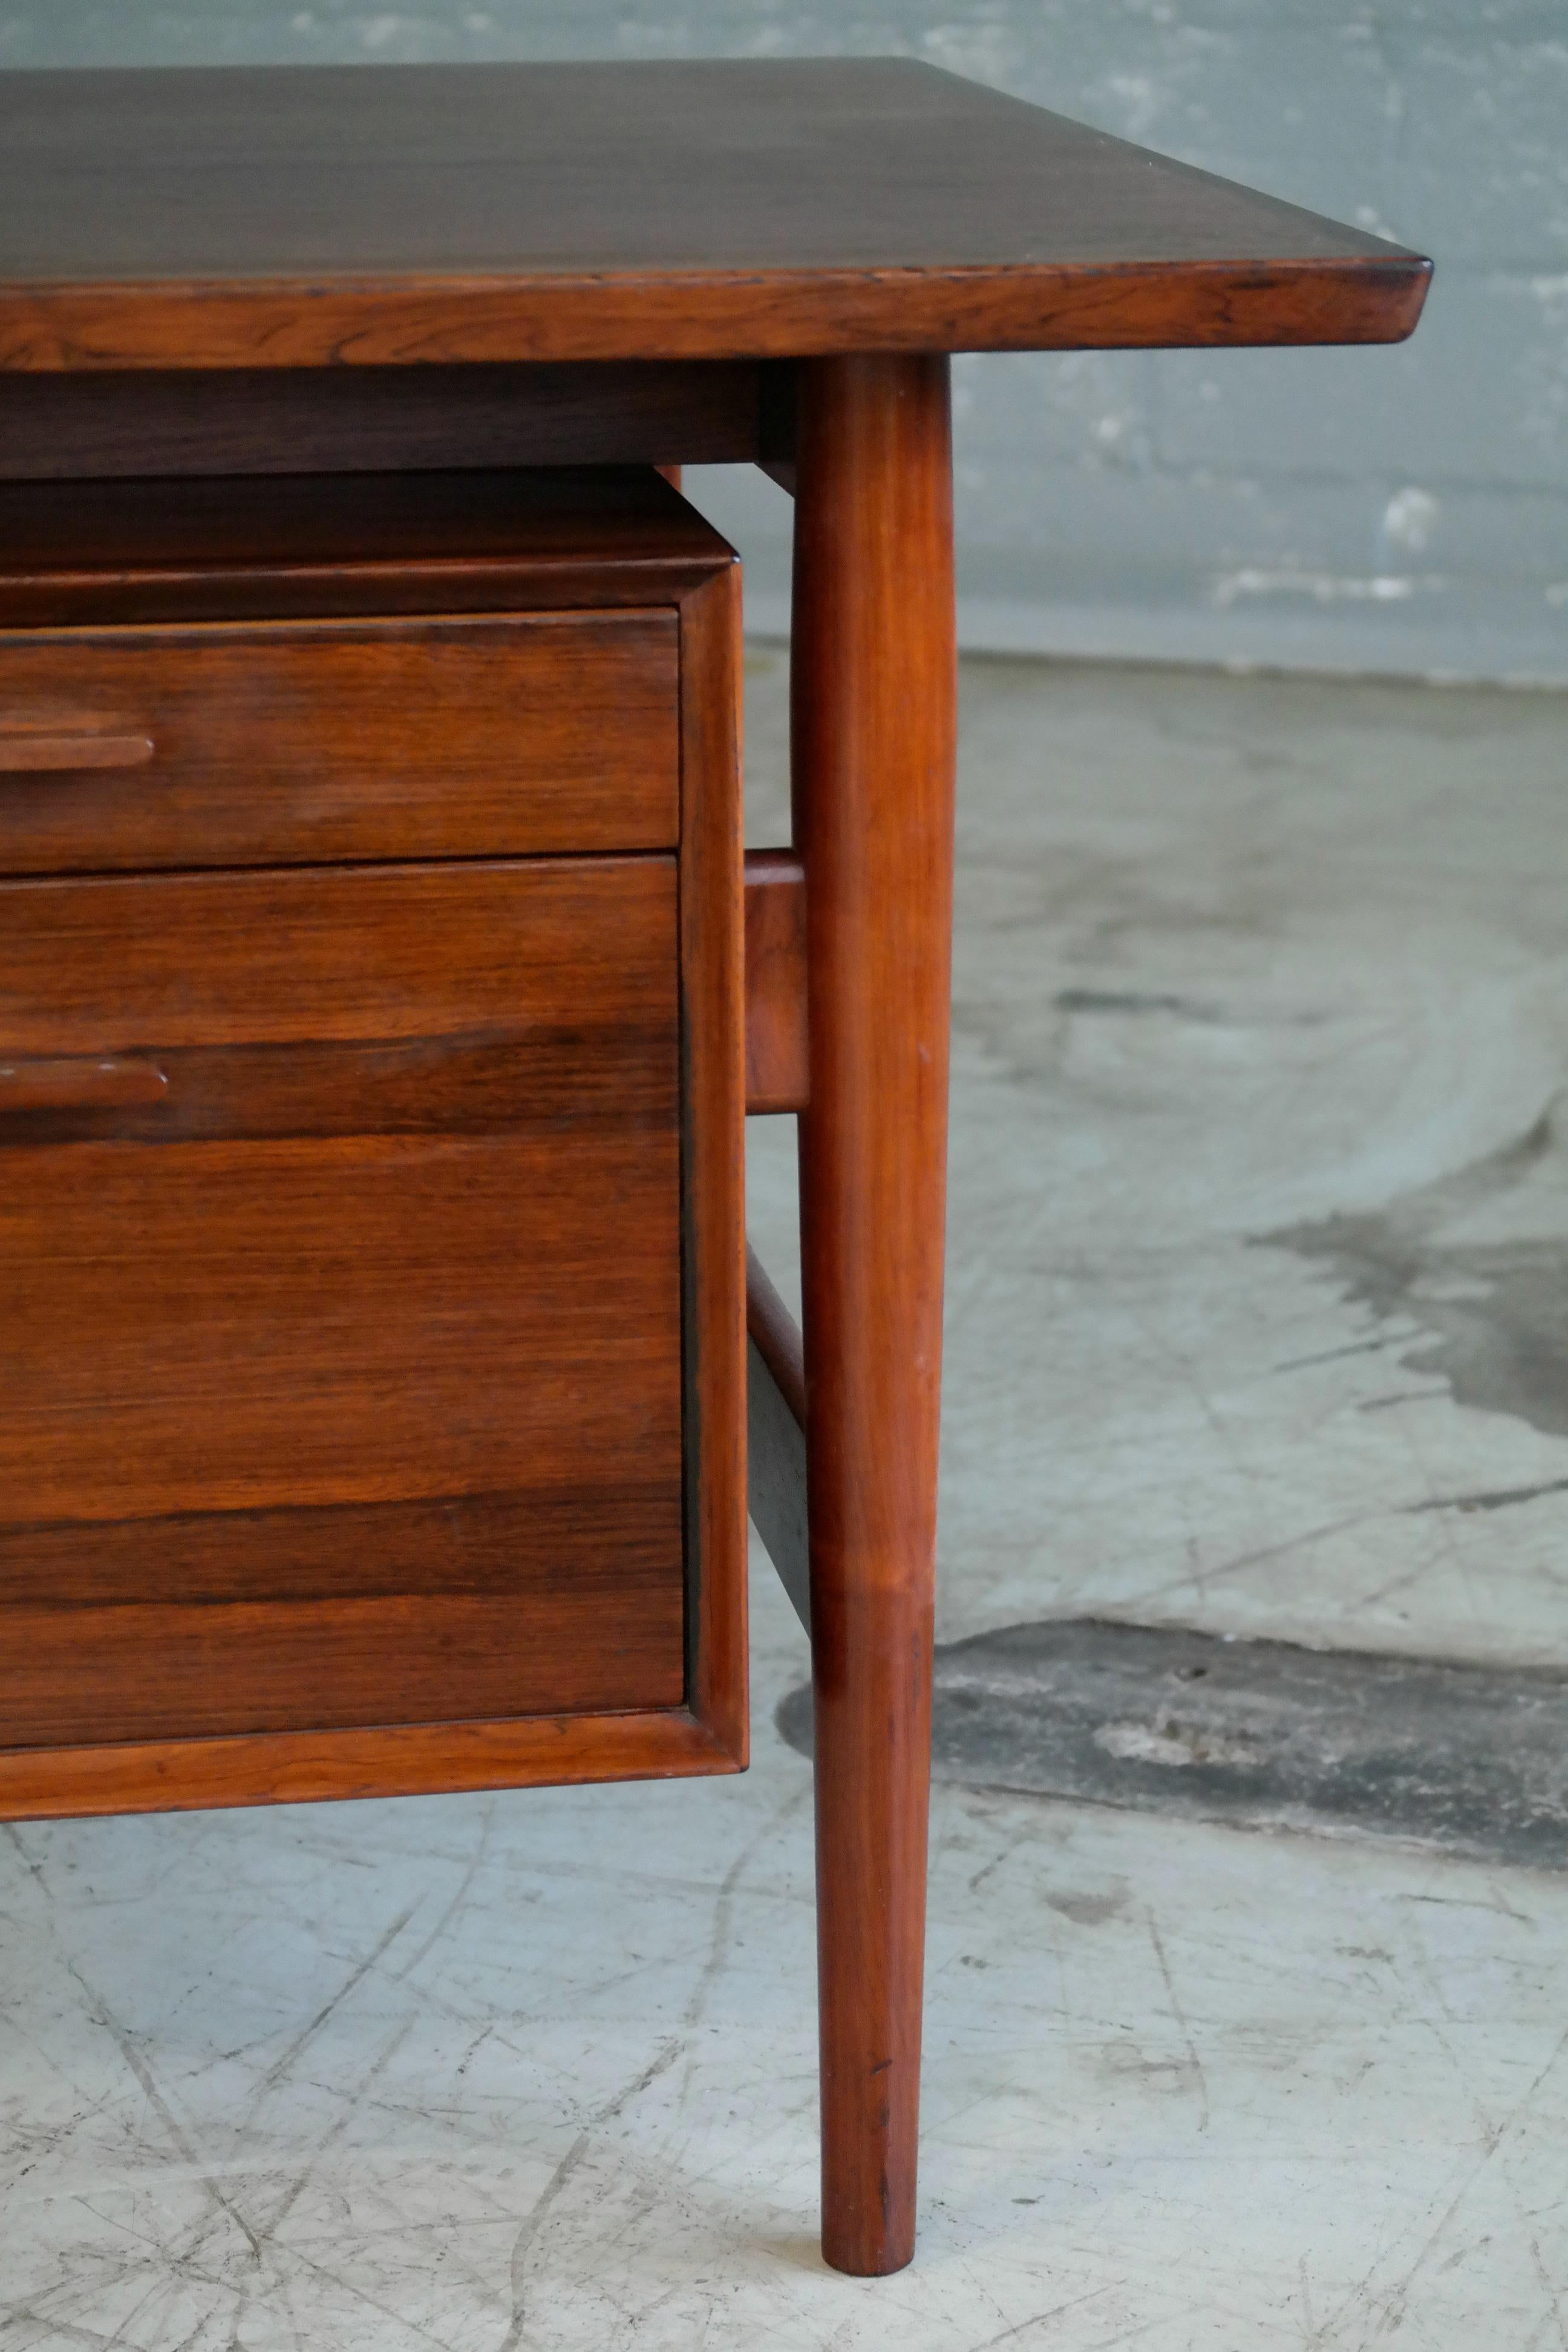 Danish Executive Rosewood Desk by Arne Vodder for Sibast from 1950s